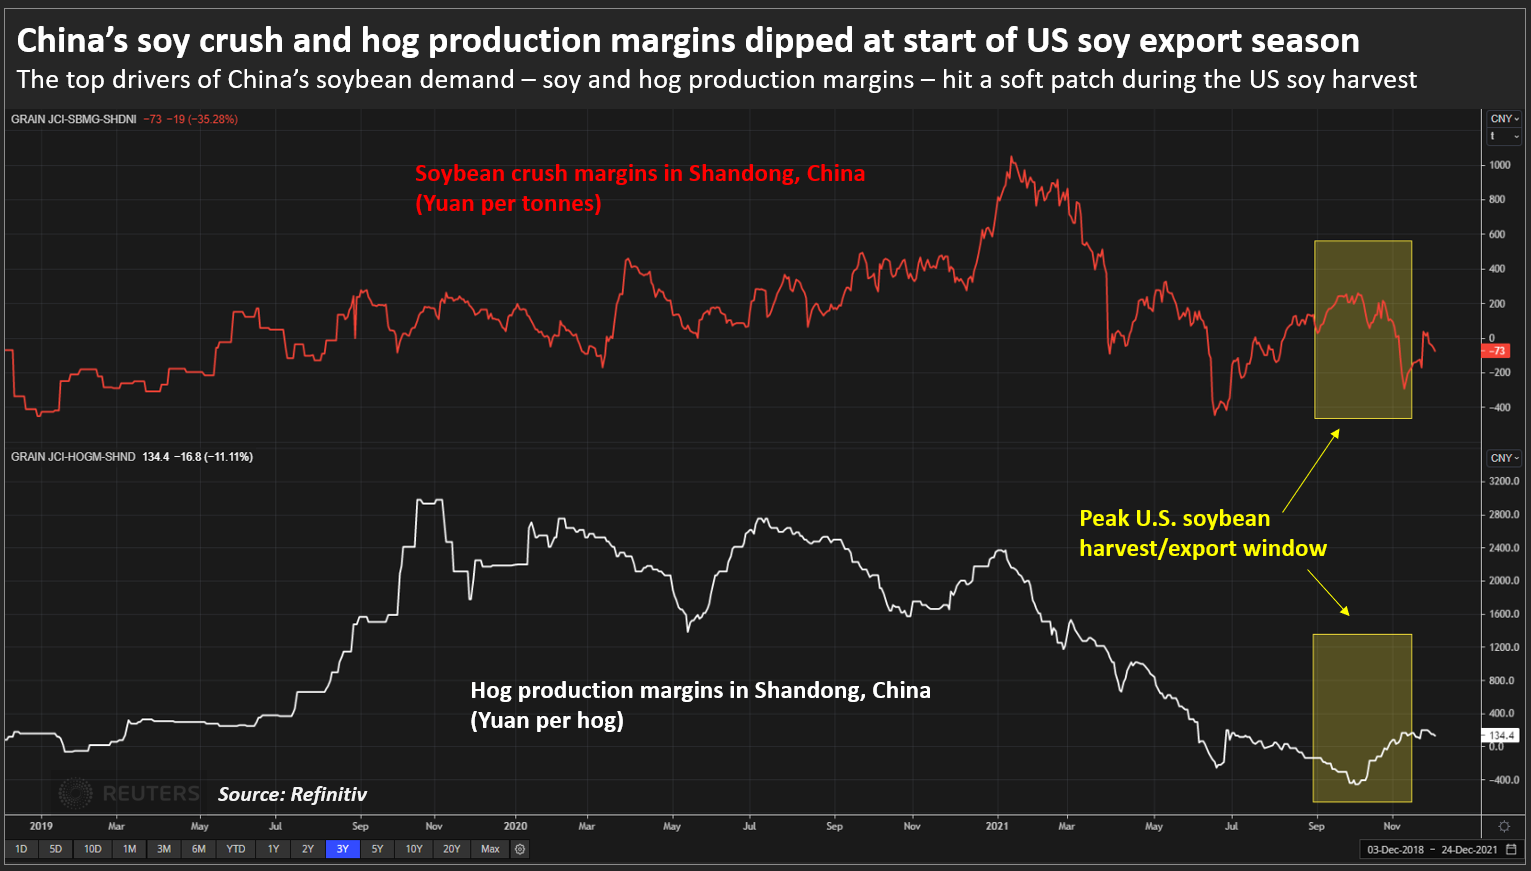 Soybean and pork production margins in China tumbled at the start of the soybean export season to the United States